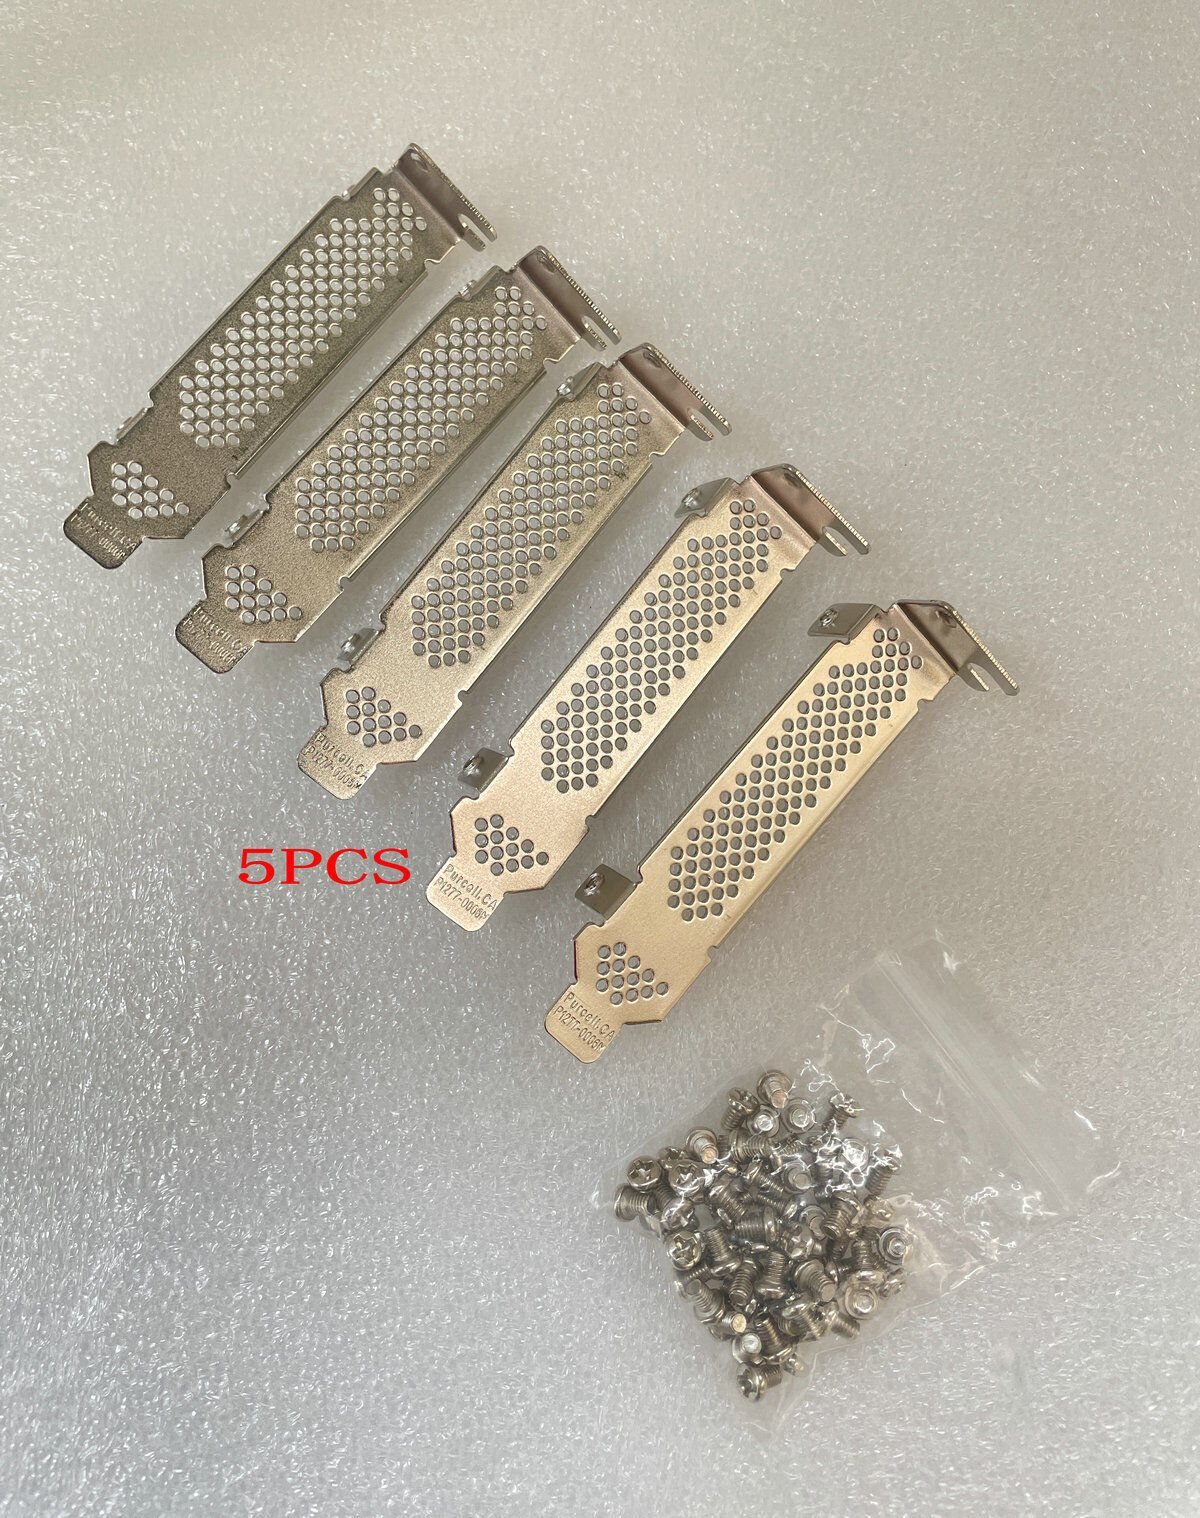 5pcs Low Profile Bracket for IBM M1015, M5015, LSI 9260-8i HP P400 P410 and more